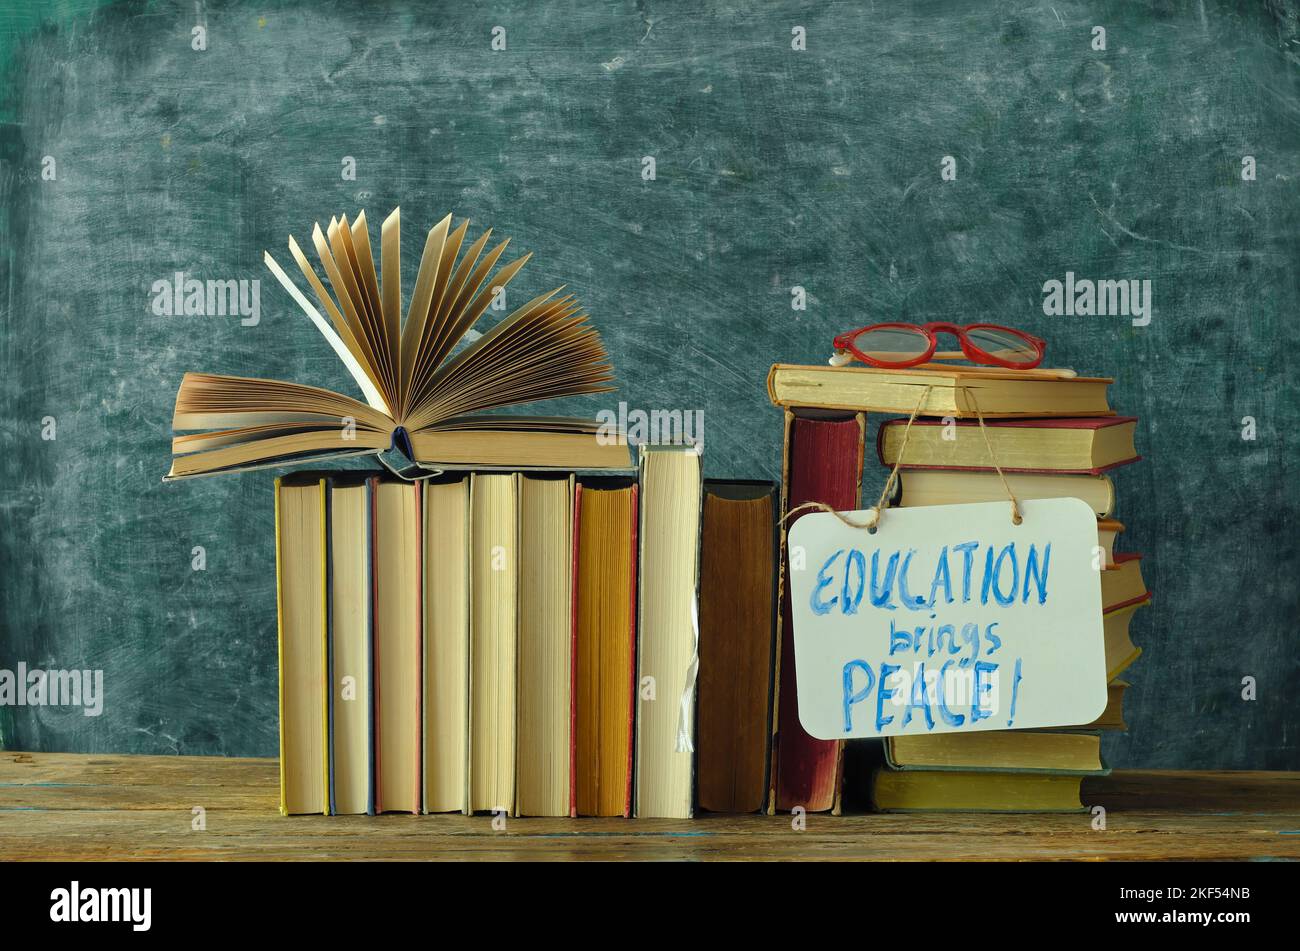 Stack of hardback books with Education brings peace slogan sign blackboard background.Learning,education,global thread,reading,schooling concept. Free Stock Photo